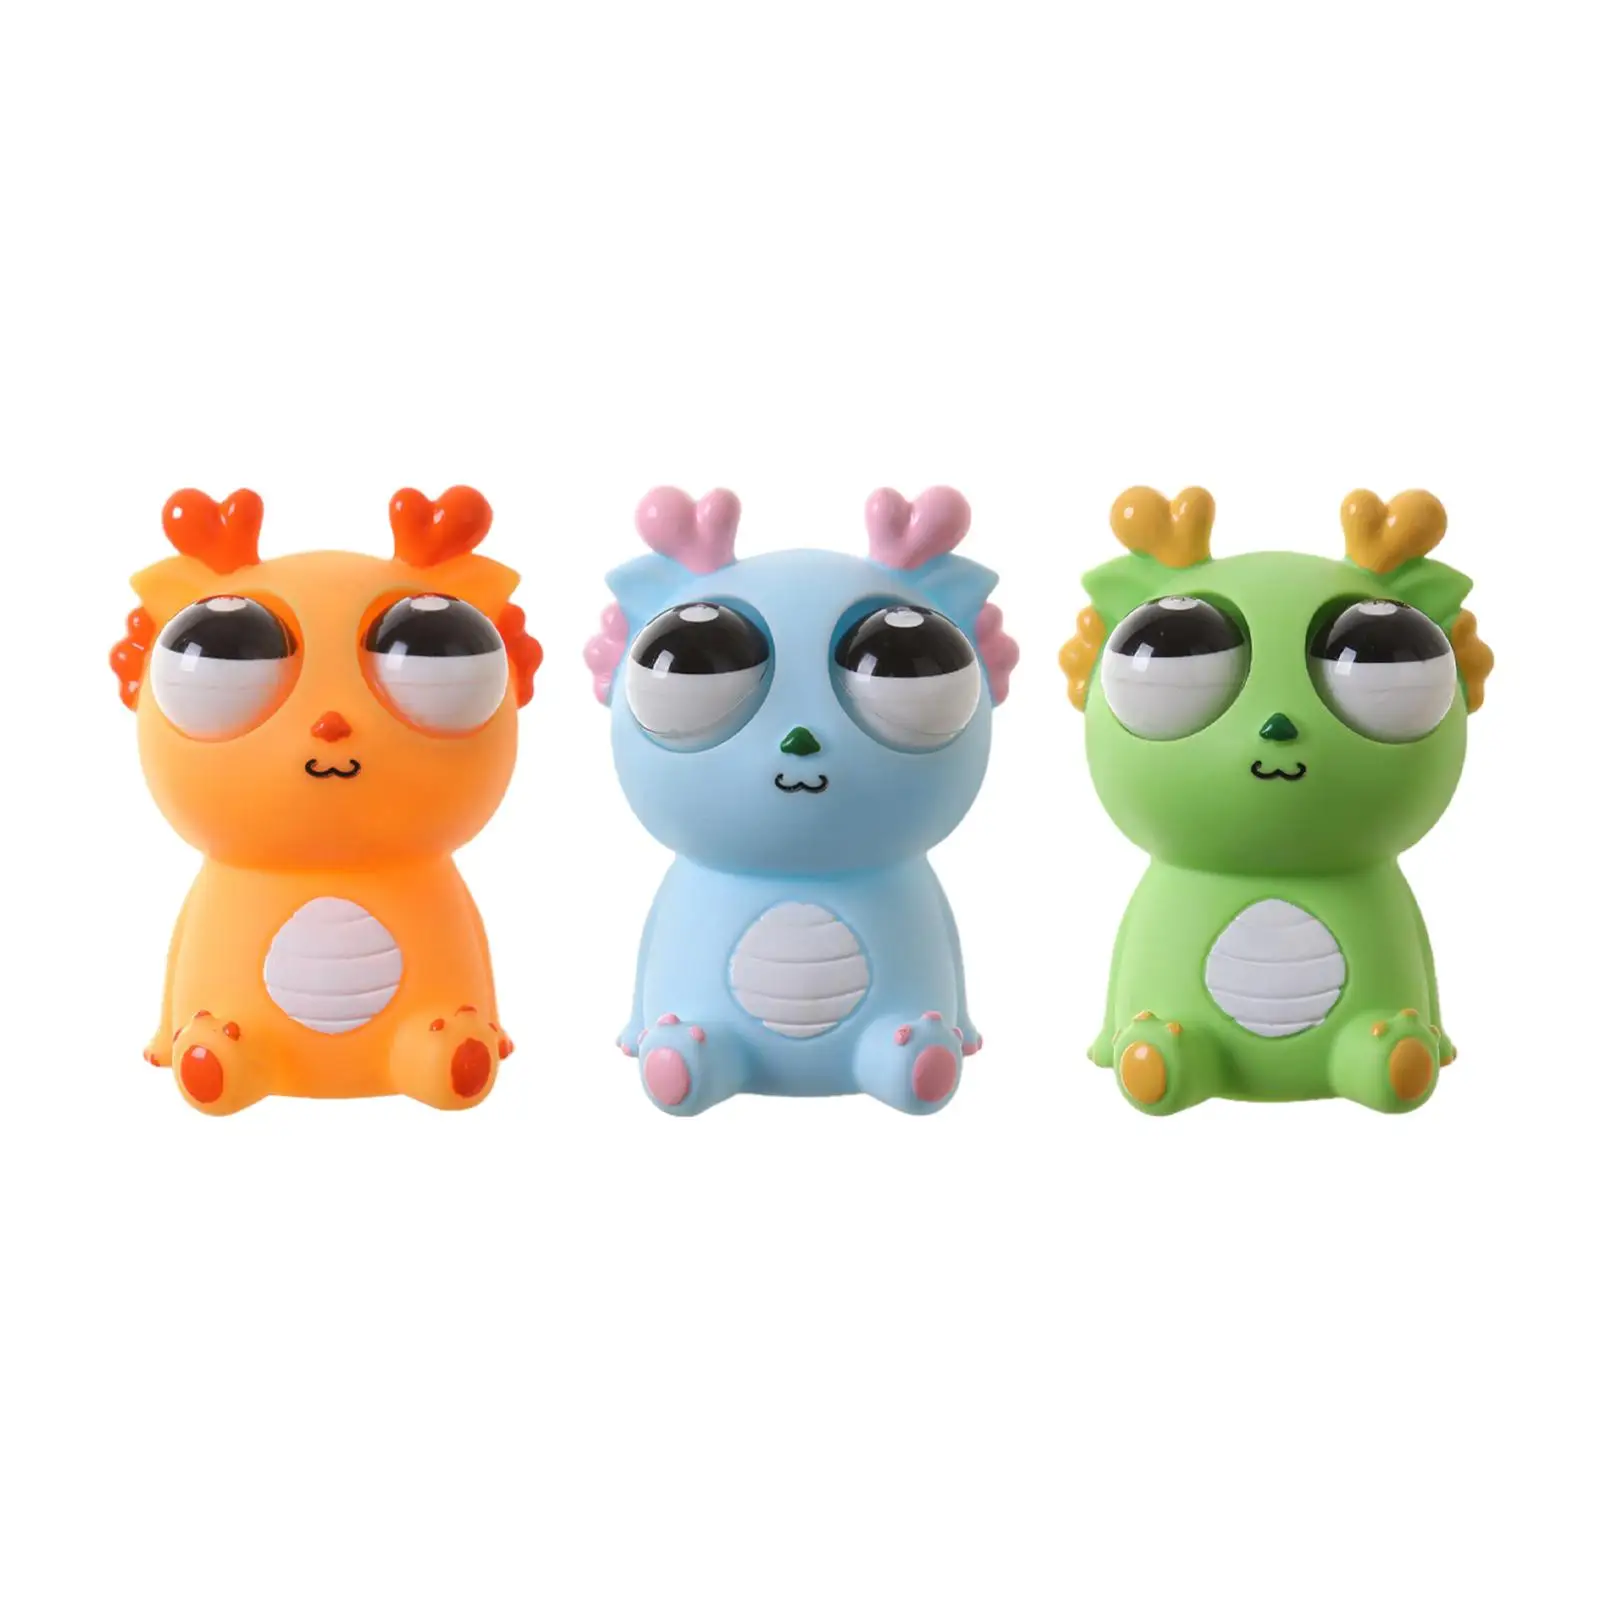 

Dragon Relaxing Toy Soft Fidget Sensory Toy Funny Cartoon Big Eyes Dragon Toy for Party Favors Goodie Bag Filler Gifts Kids